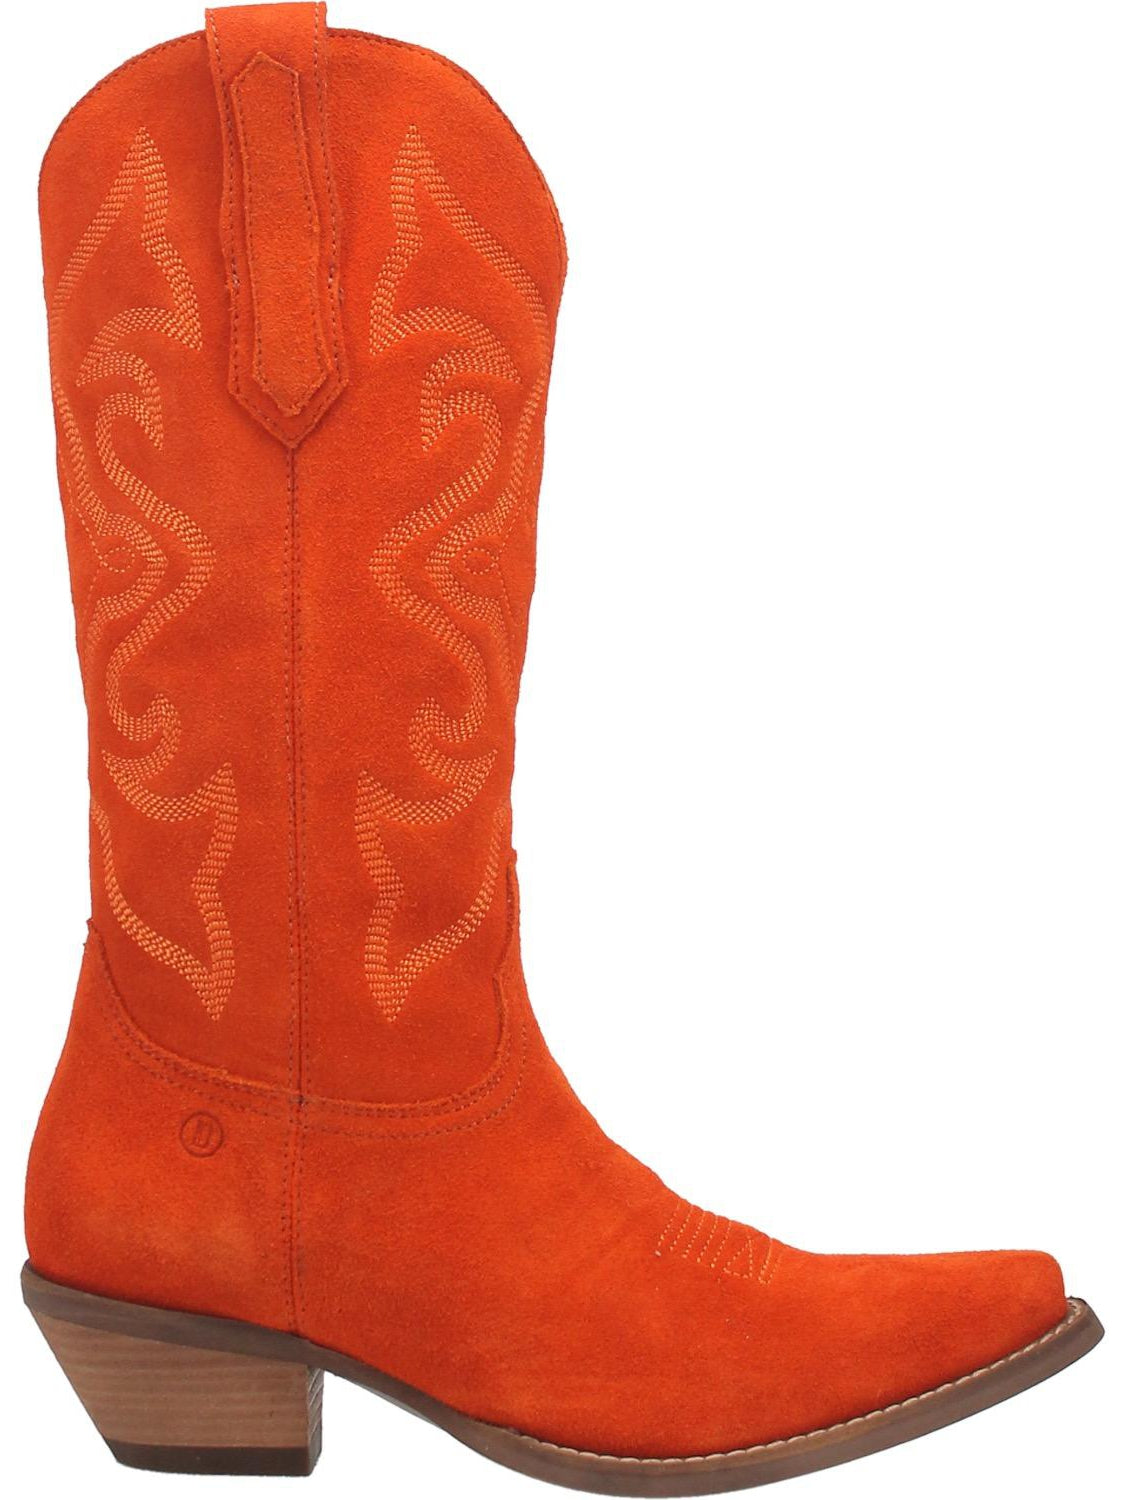 Out West Boot by Dingo from Dan Post - Orange